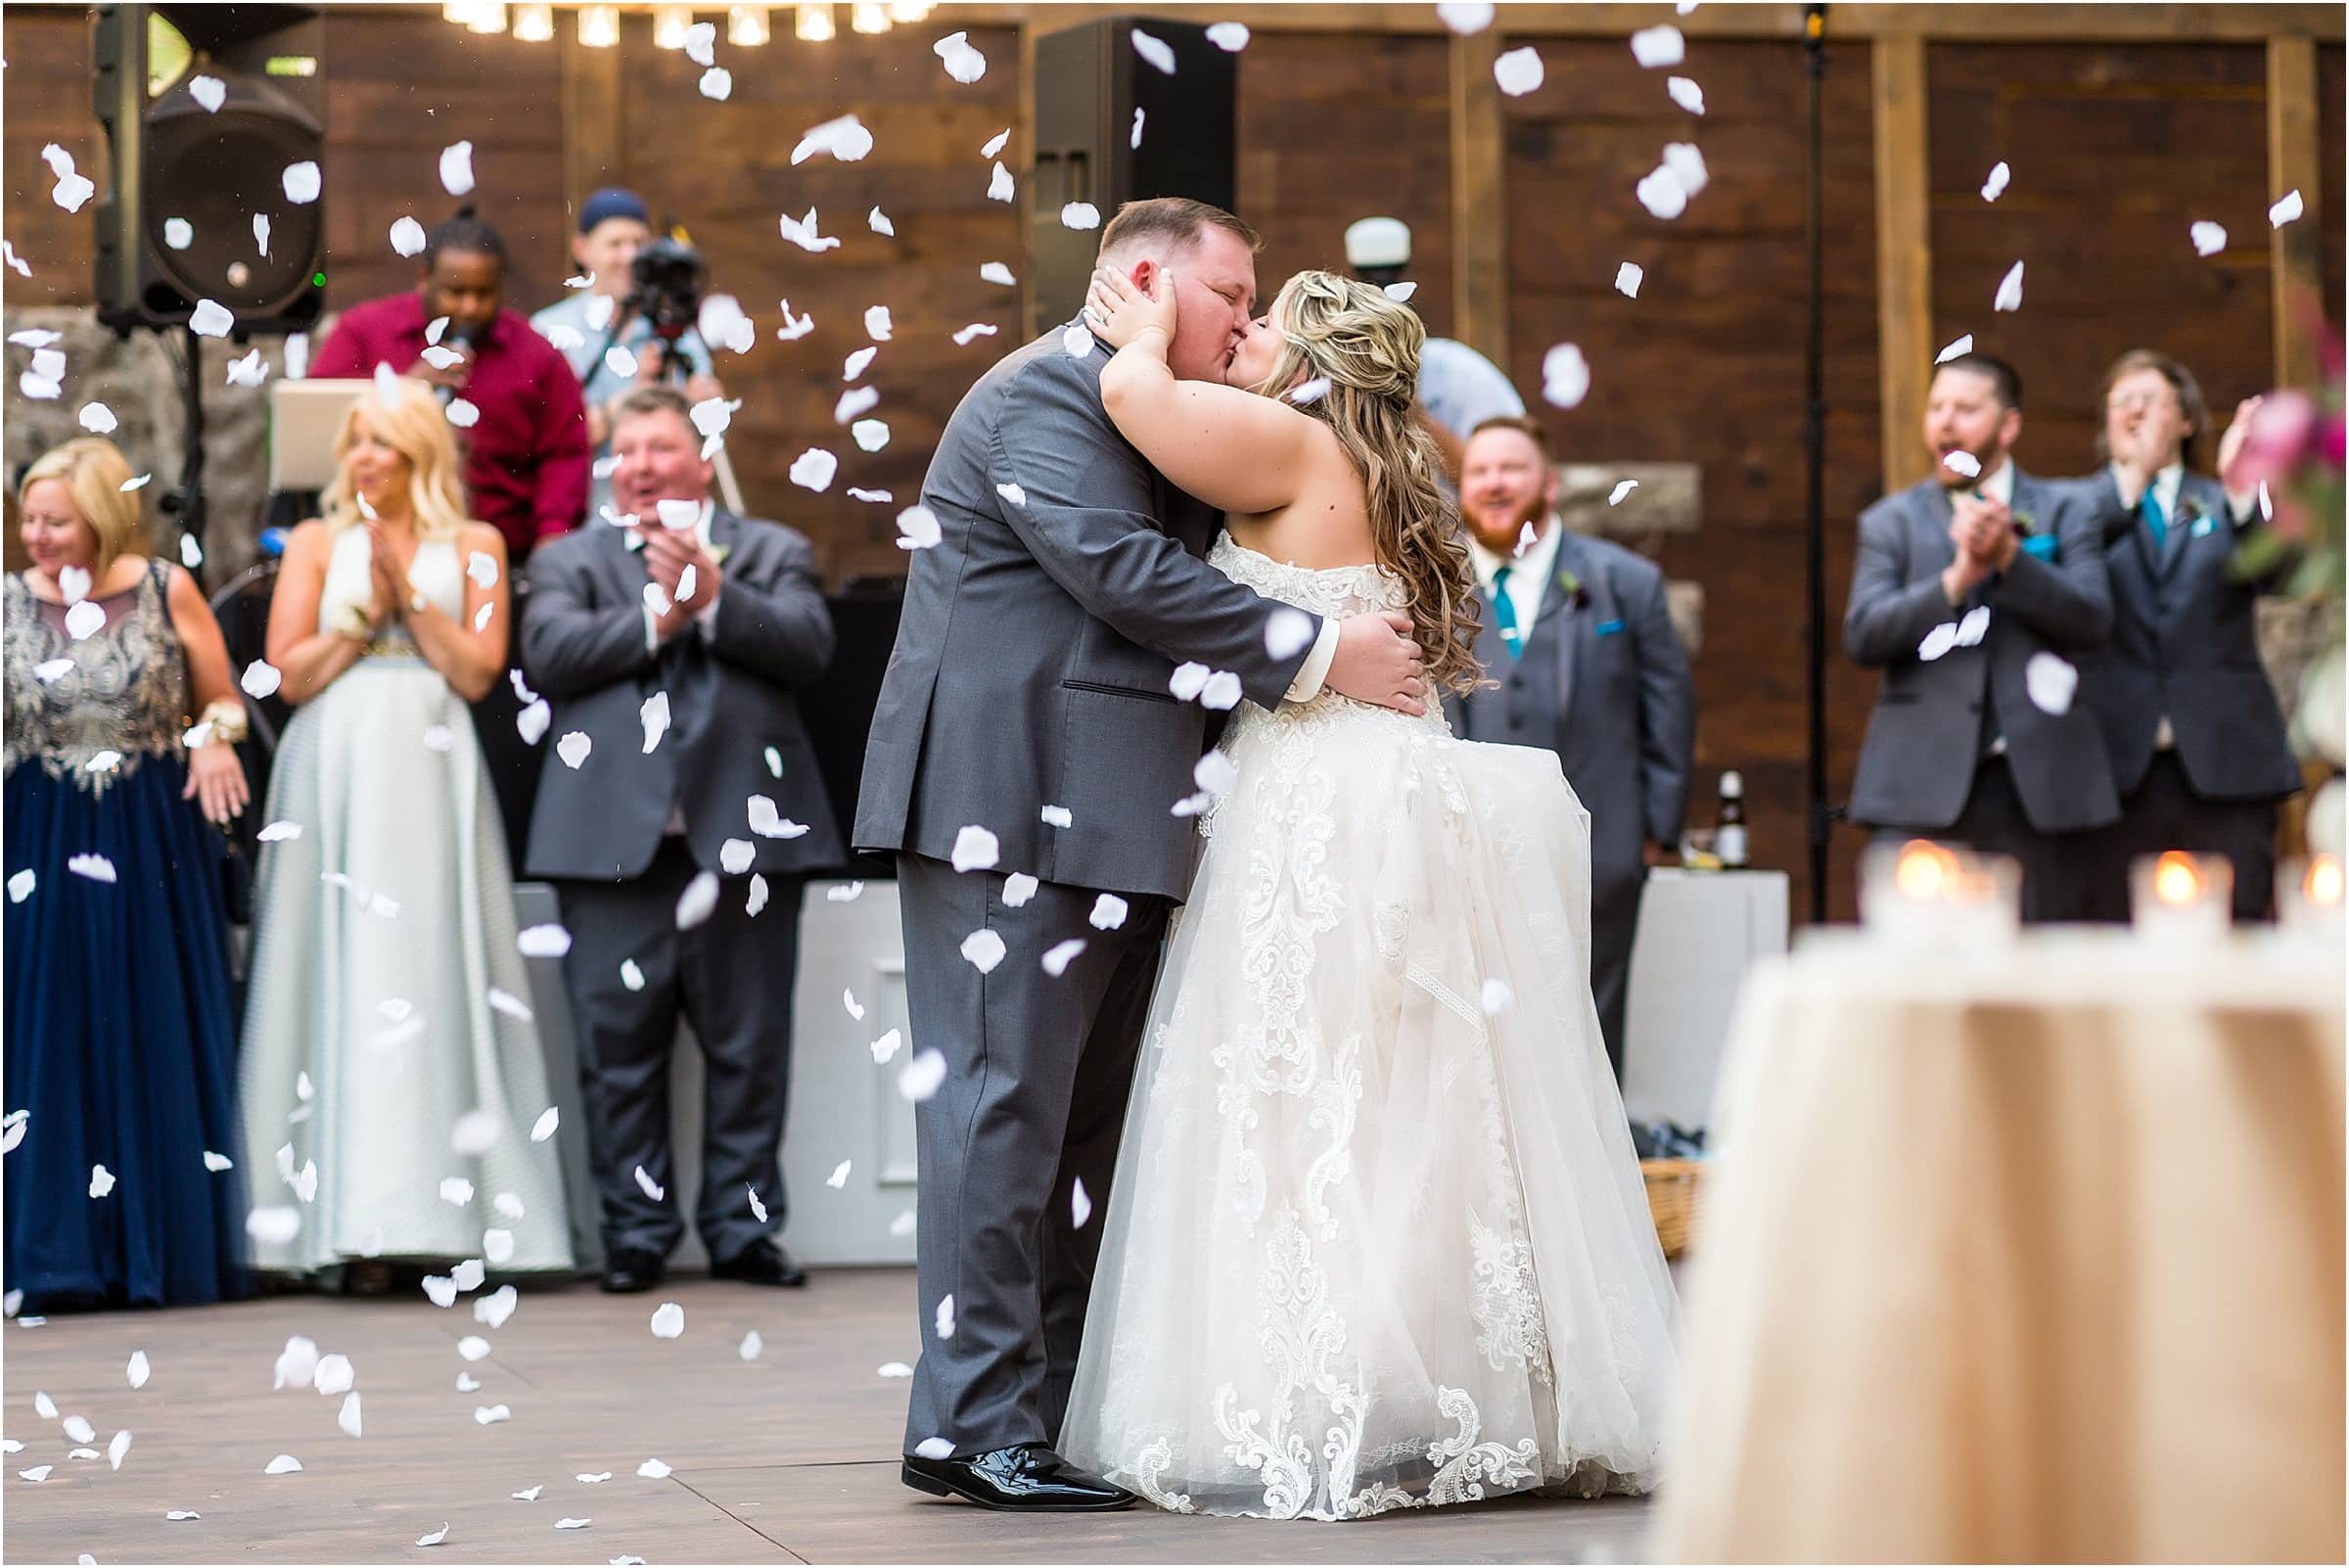 Bride and groom kissing during first dance as pedals fall around them